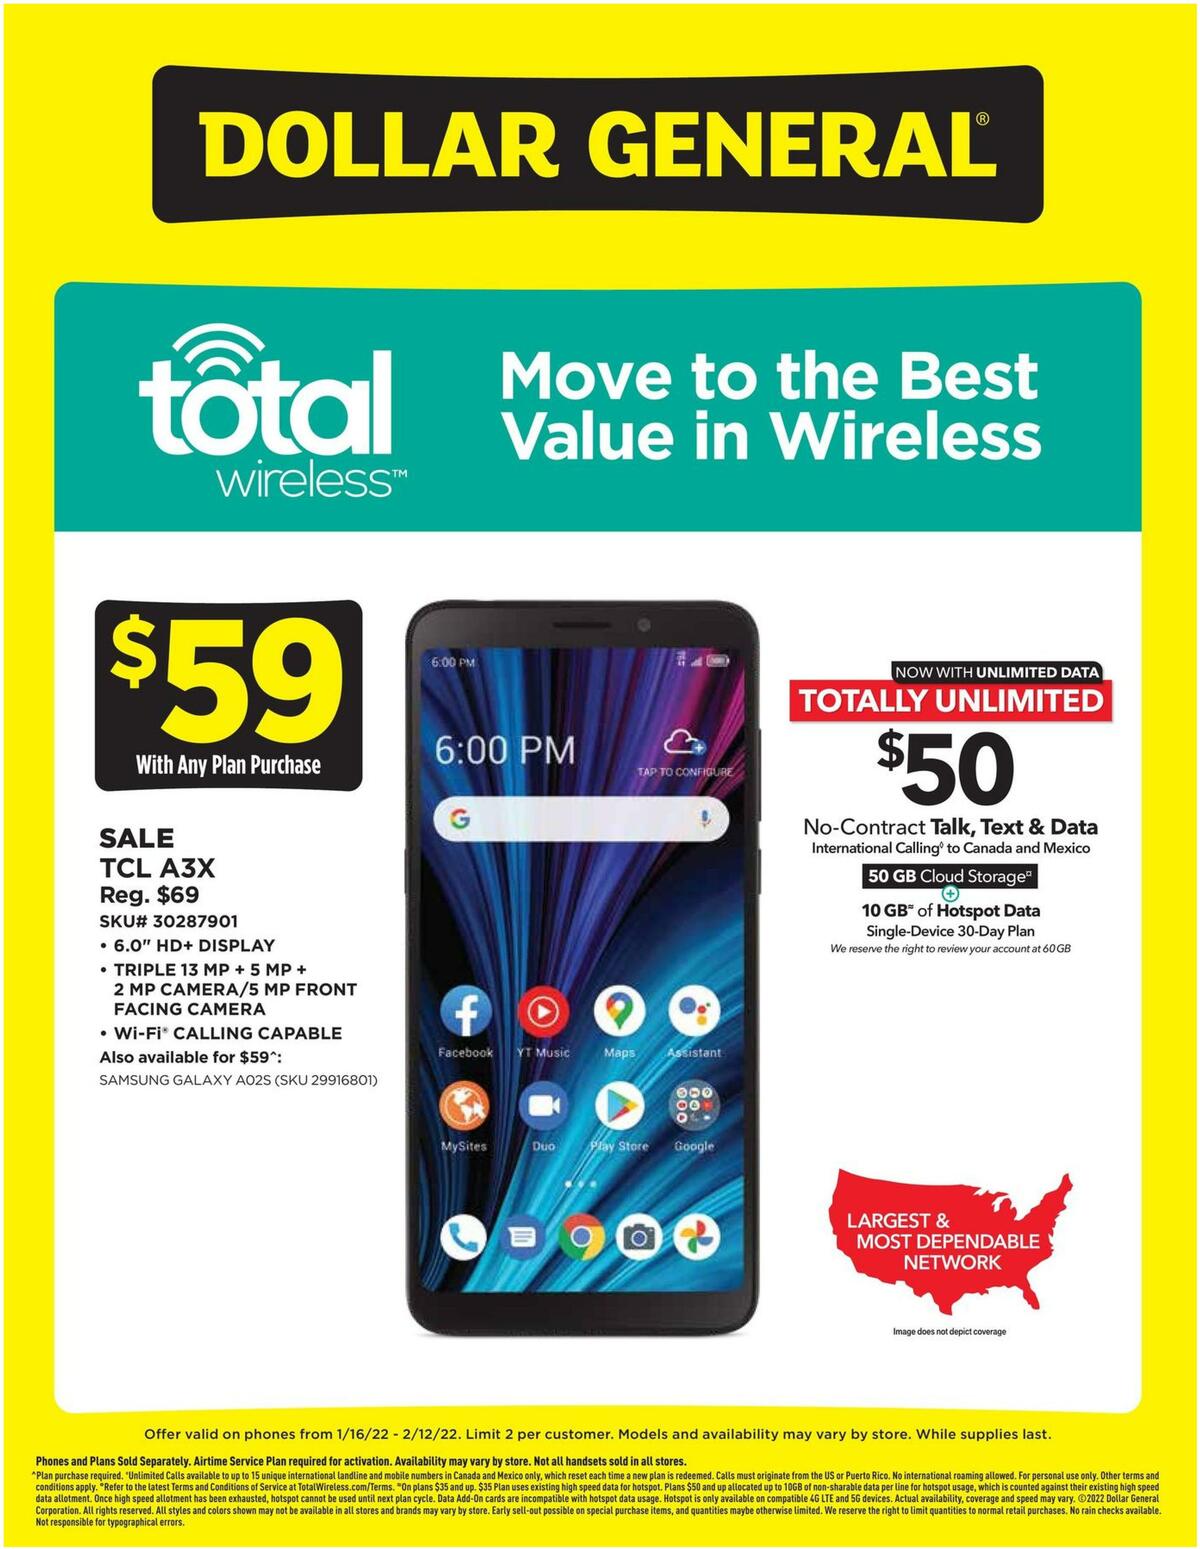 Dollar General Weekly Wireless Specials Weekly Ad from January 16